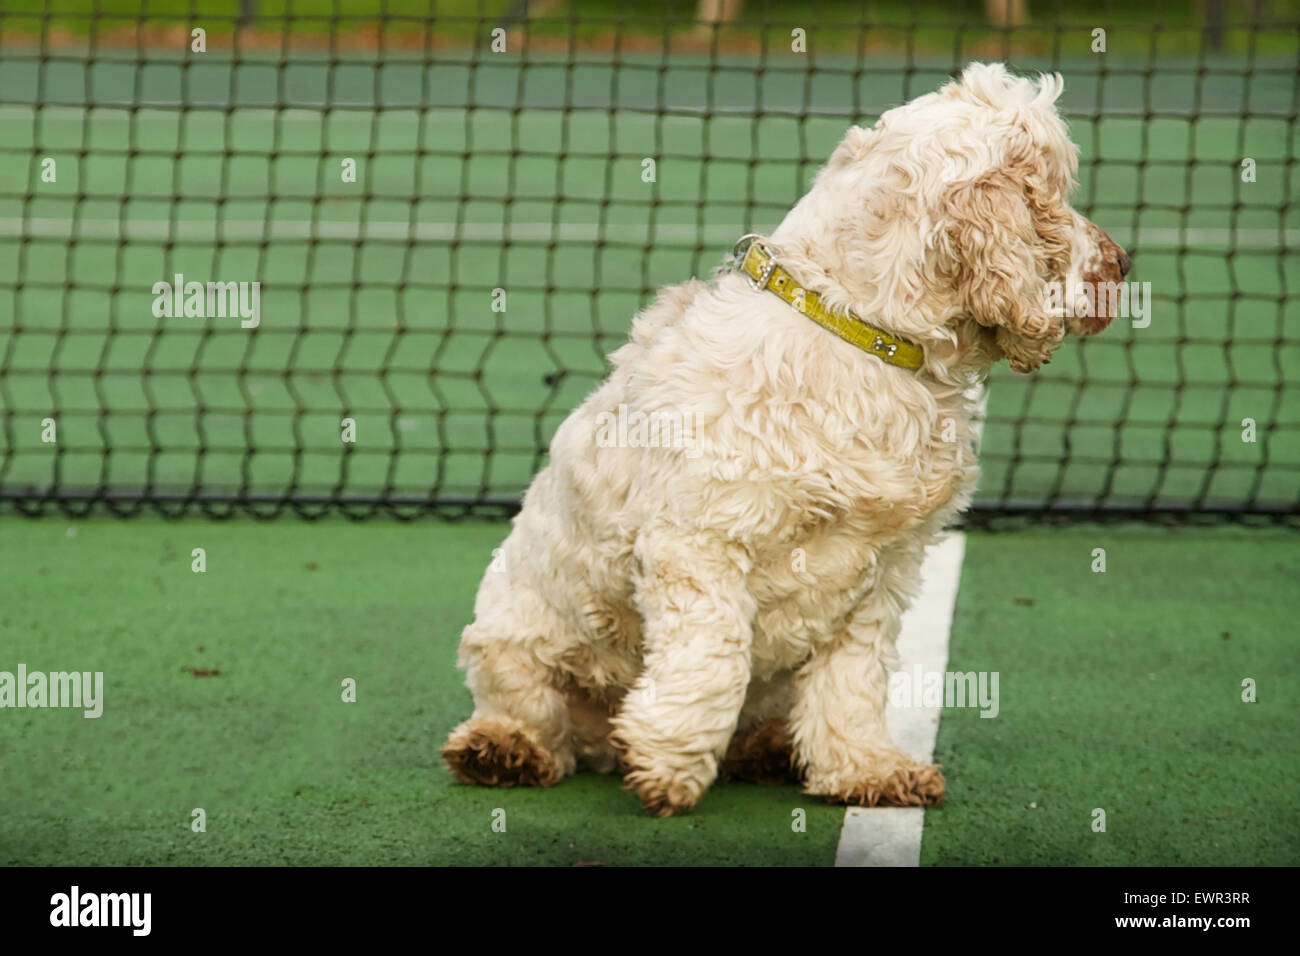 Dog on tennis center service  line  by net looking off to his left.  Cocker spaniel orange roan with paw on center line. Stock Photo